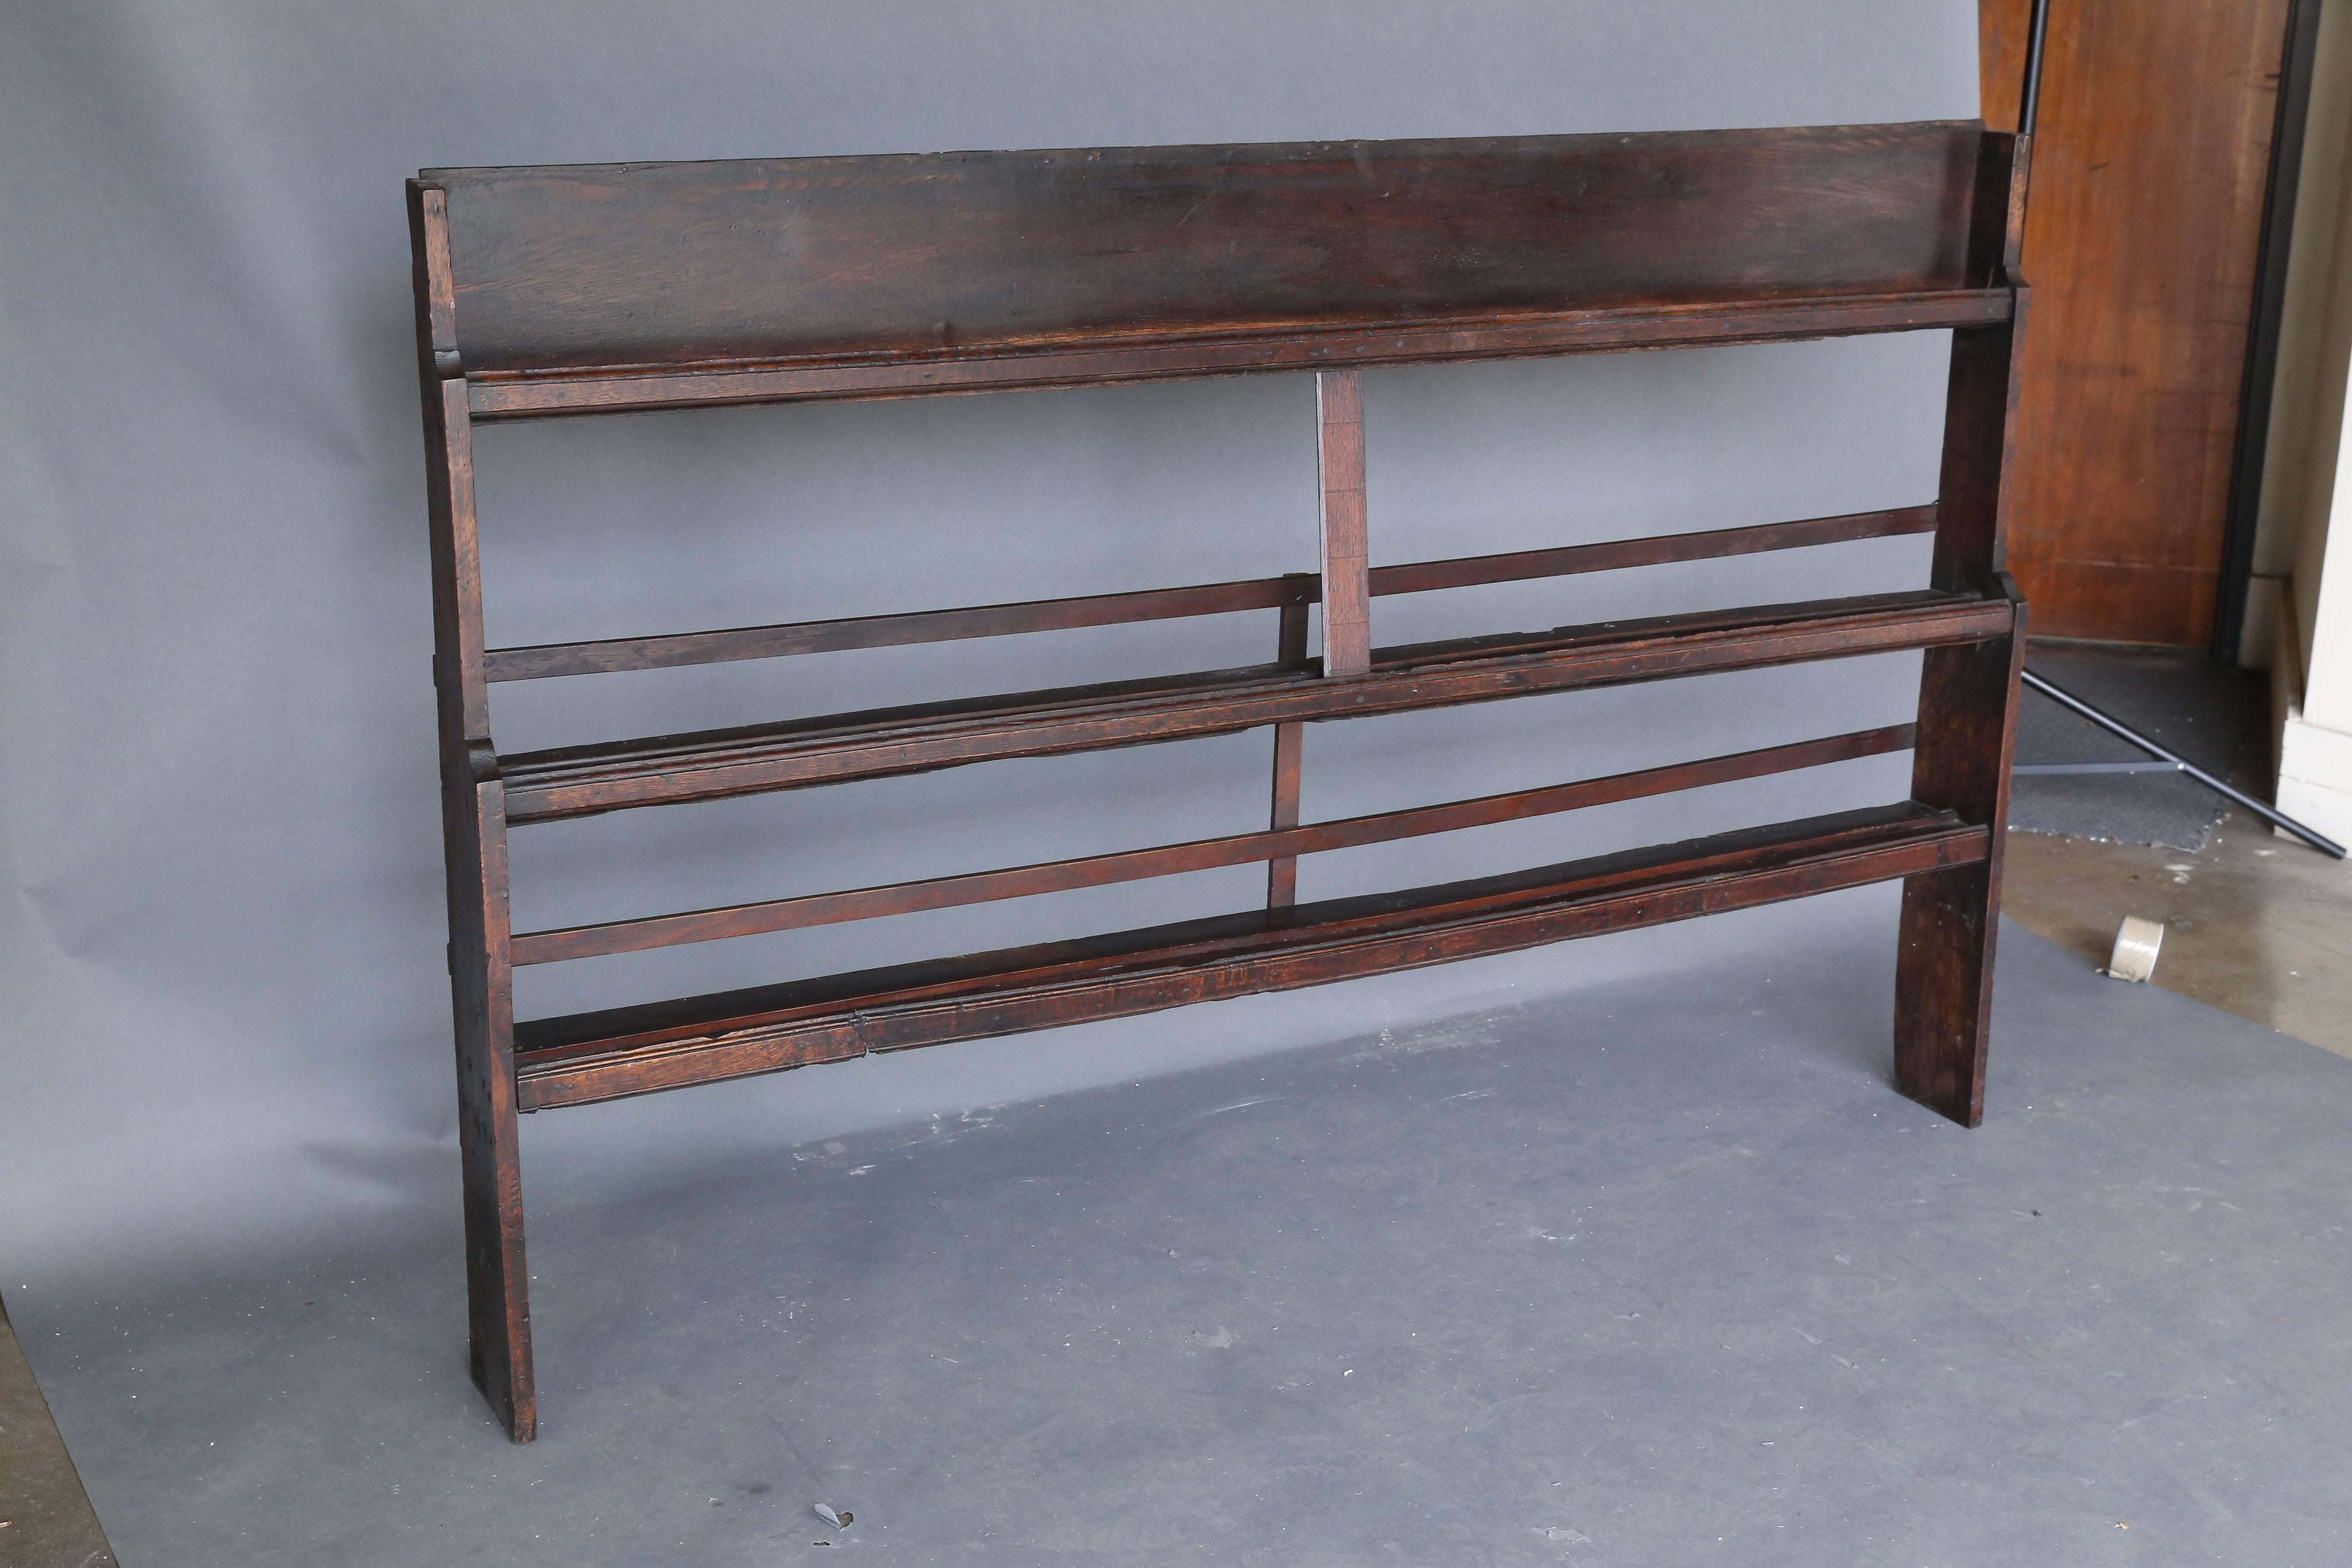 19th century three-tiered plate rack used on top of a piece of furniture or can be attached to a wall.